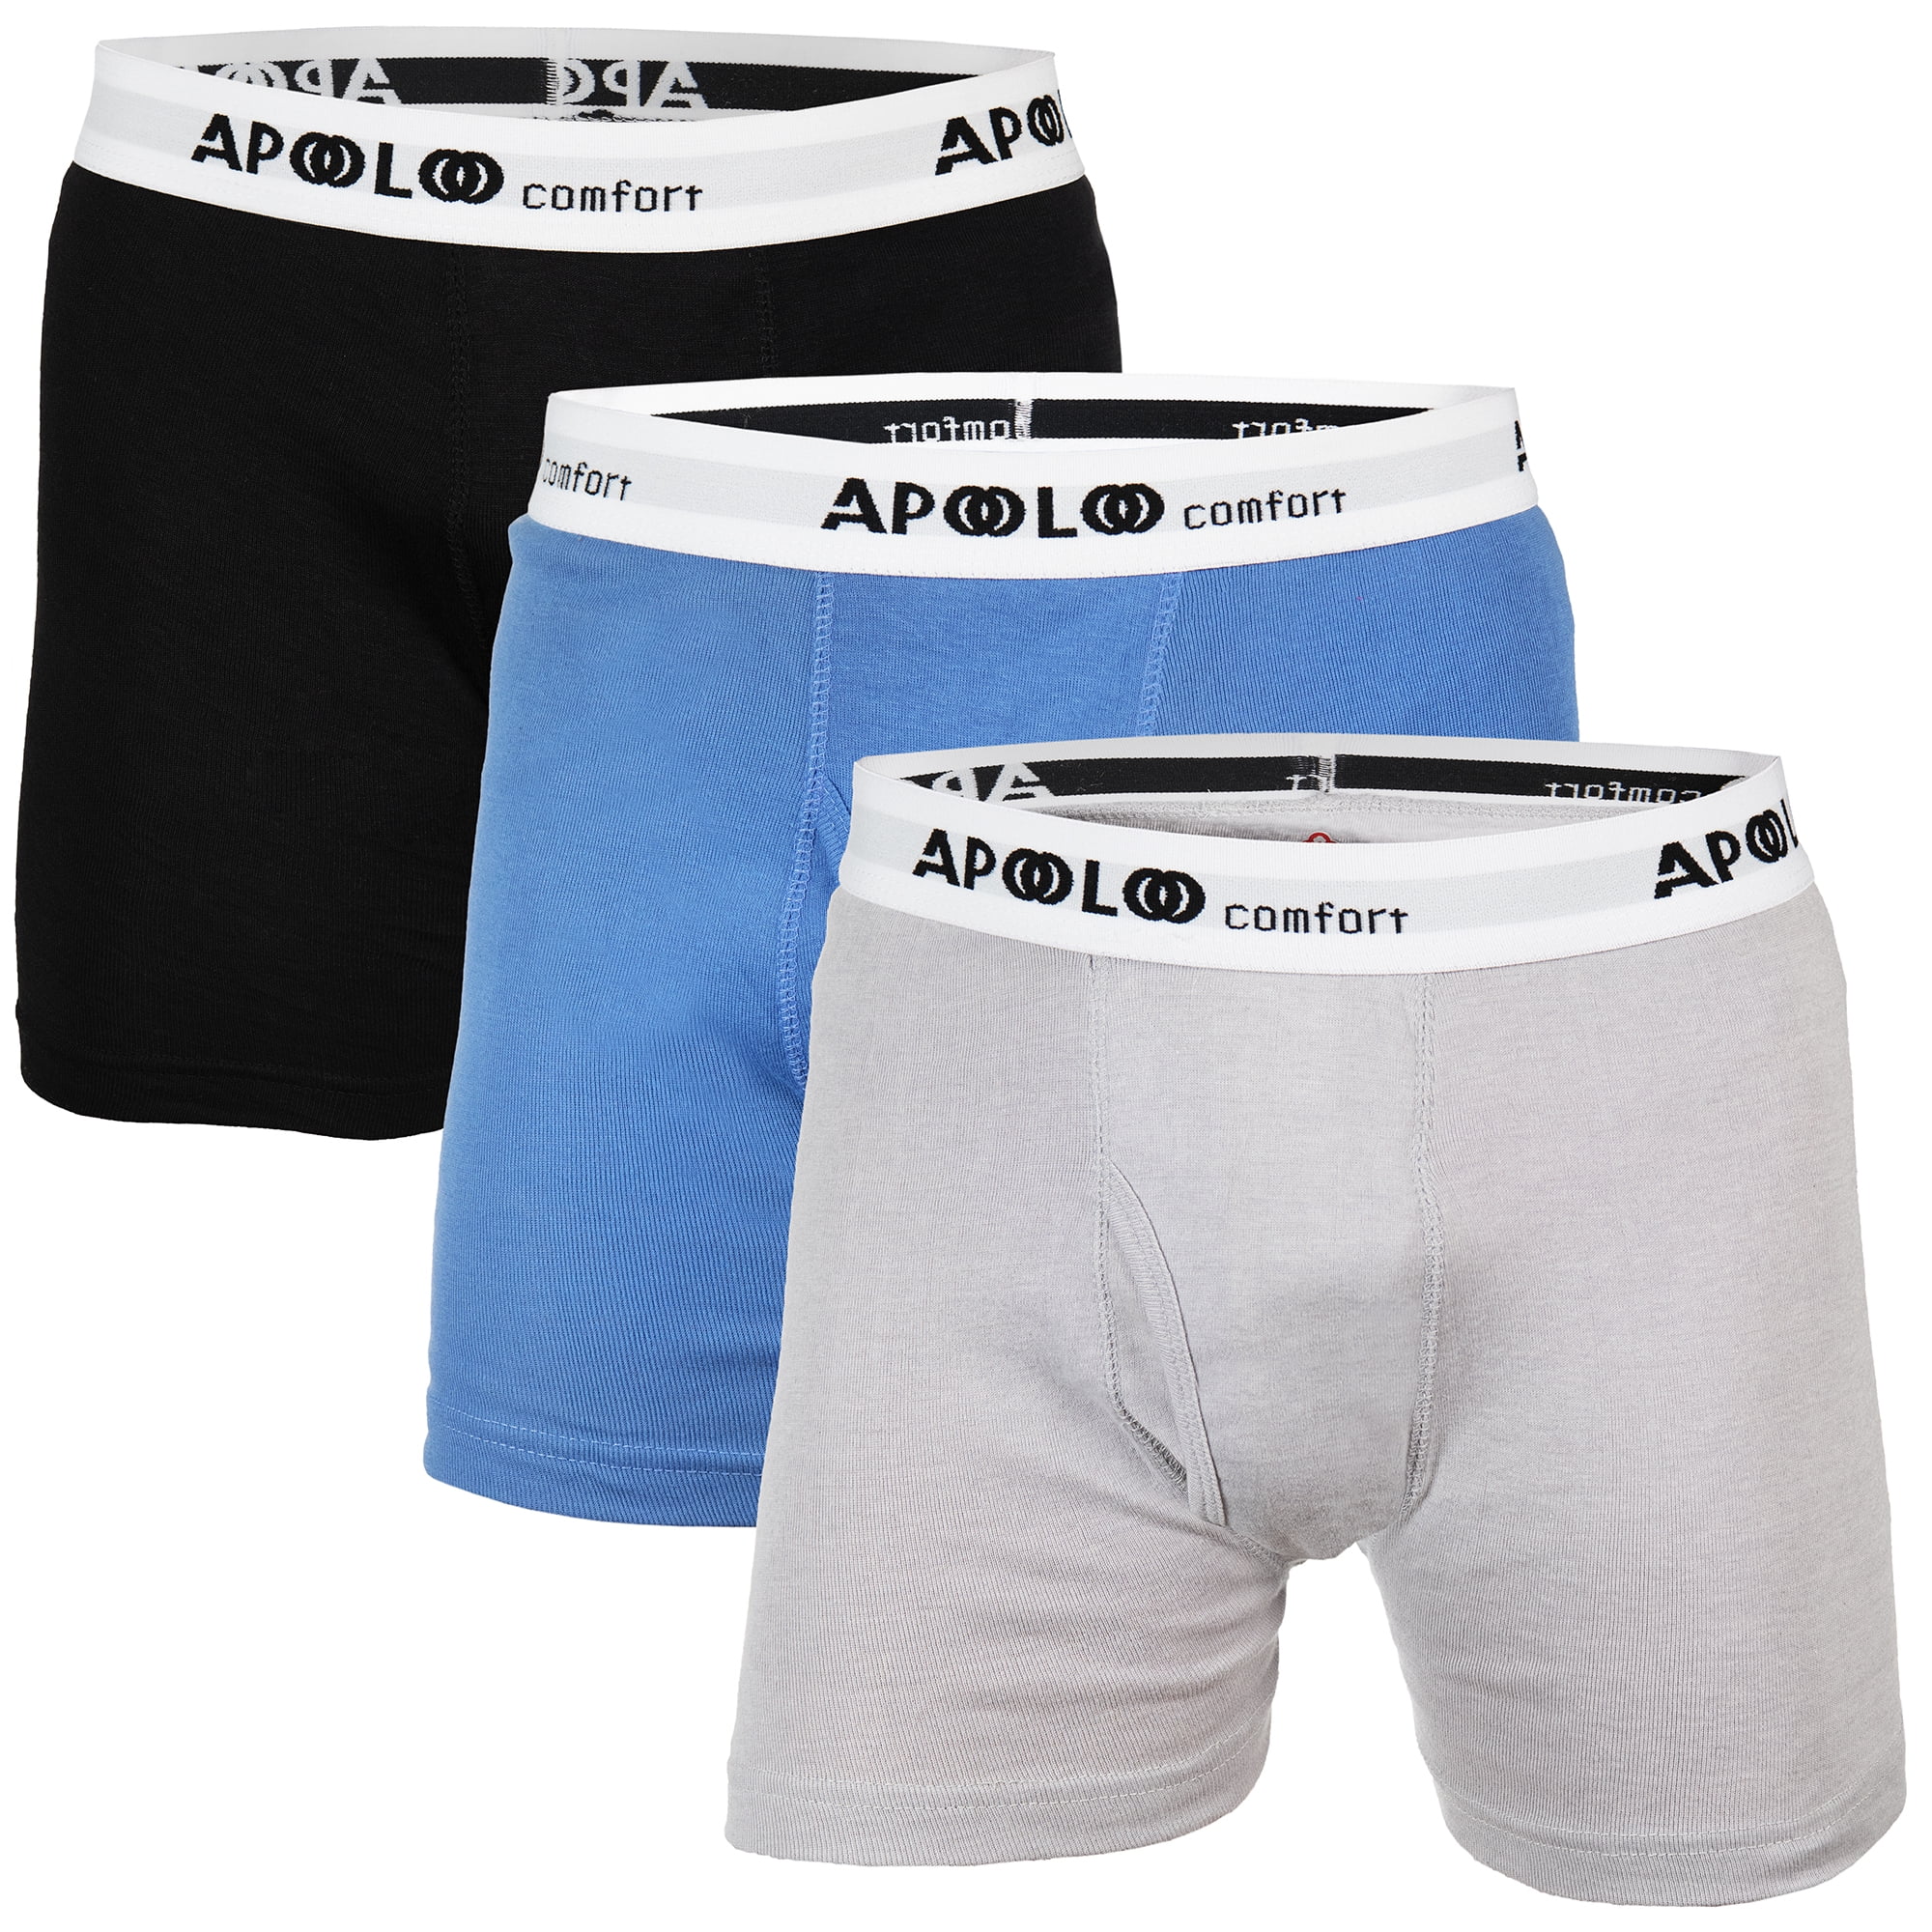 Cool Comfort Details about   Hanes Men's Comfort 5 pack Soft TAGLESS Boxer Briefs White 